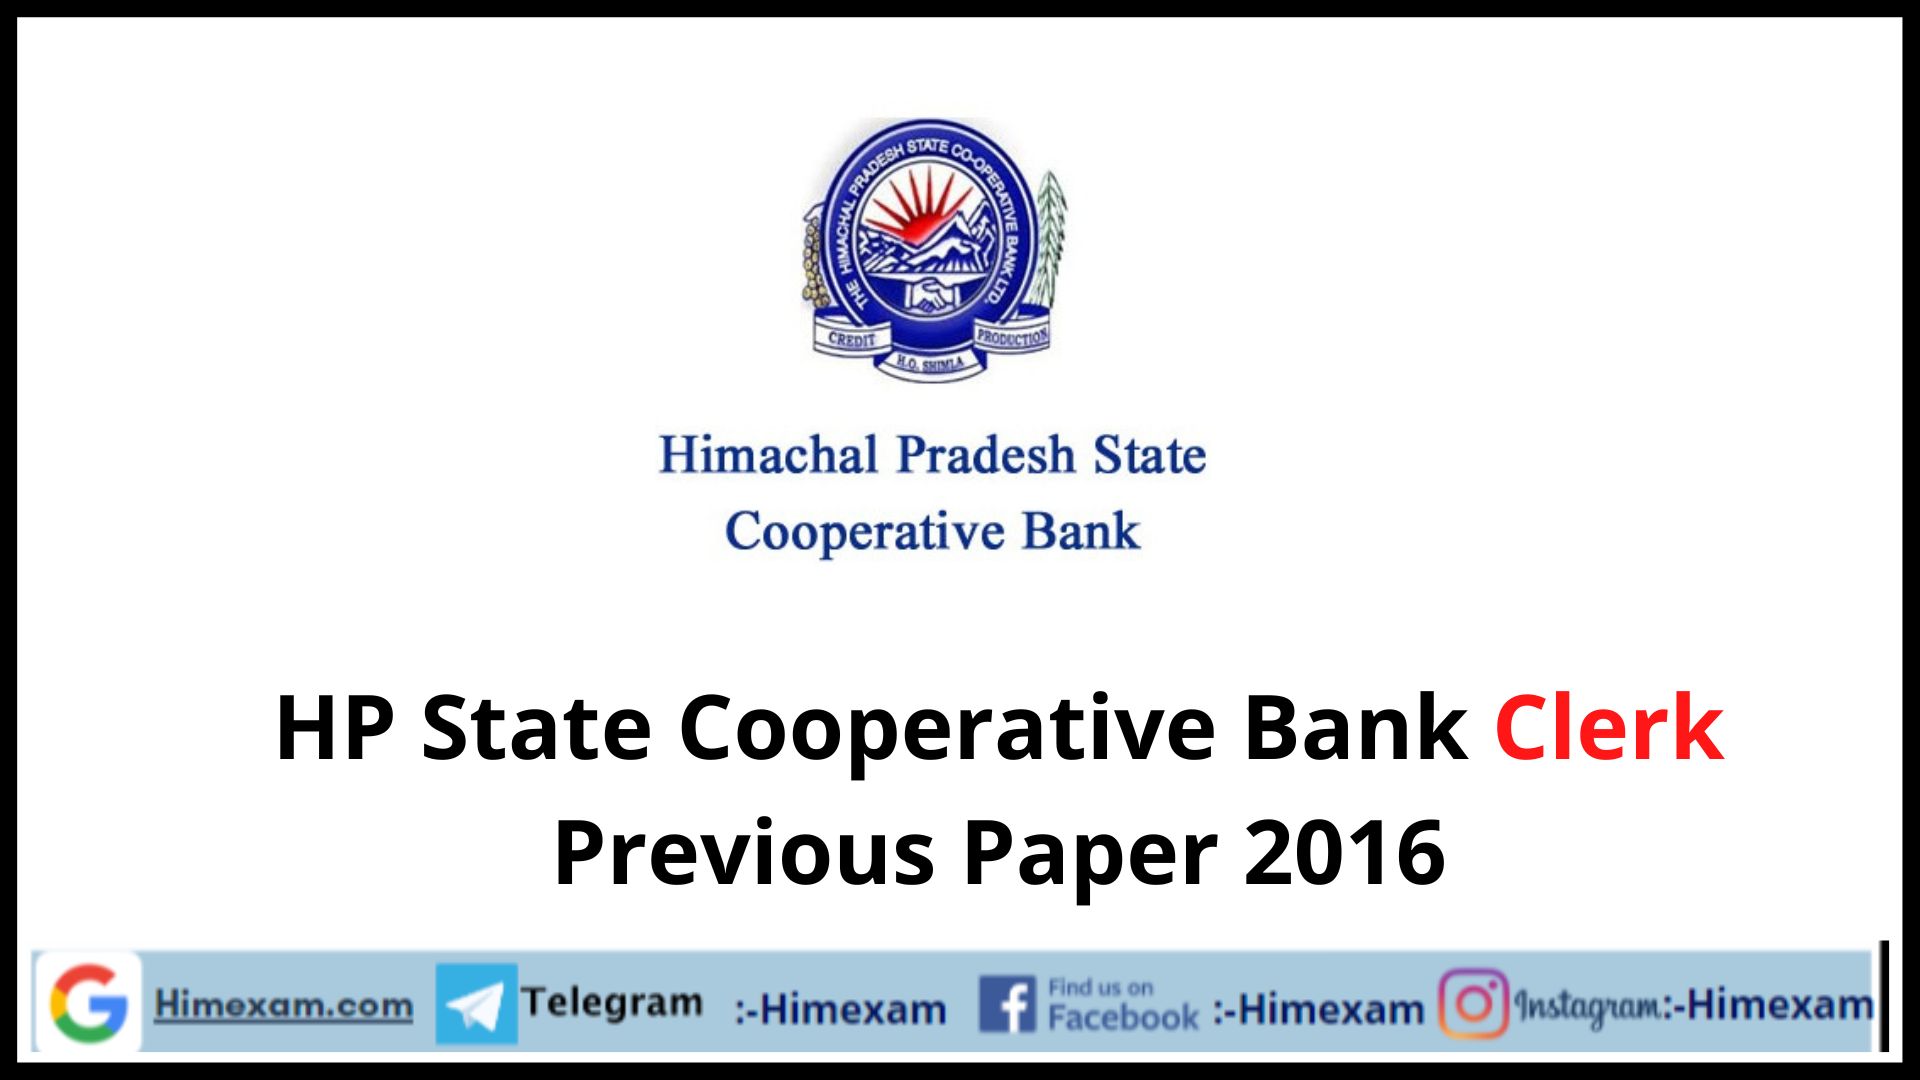 HP State Cooperative Bank Clerk Previous Paper 2016